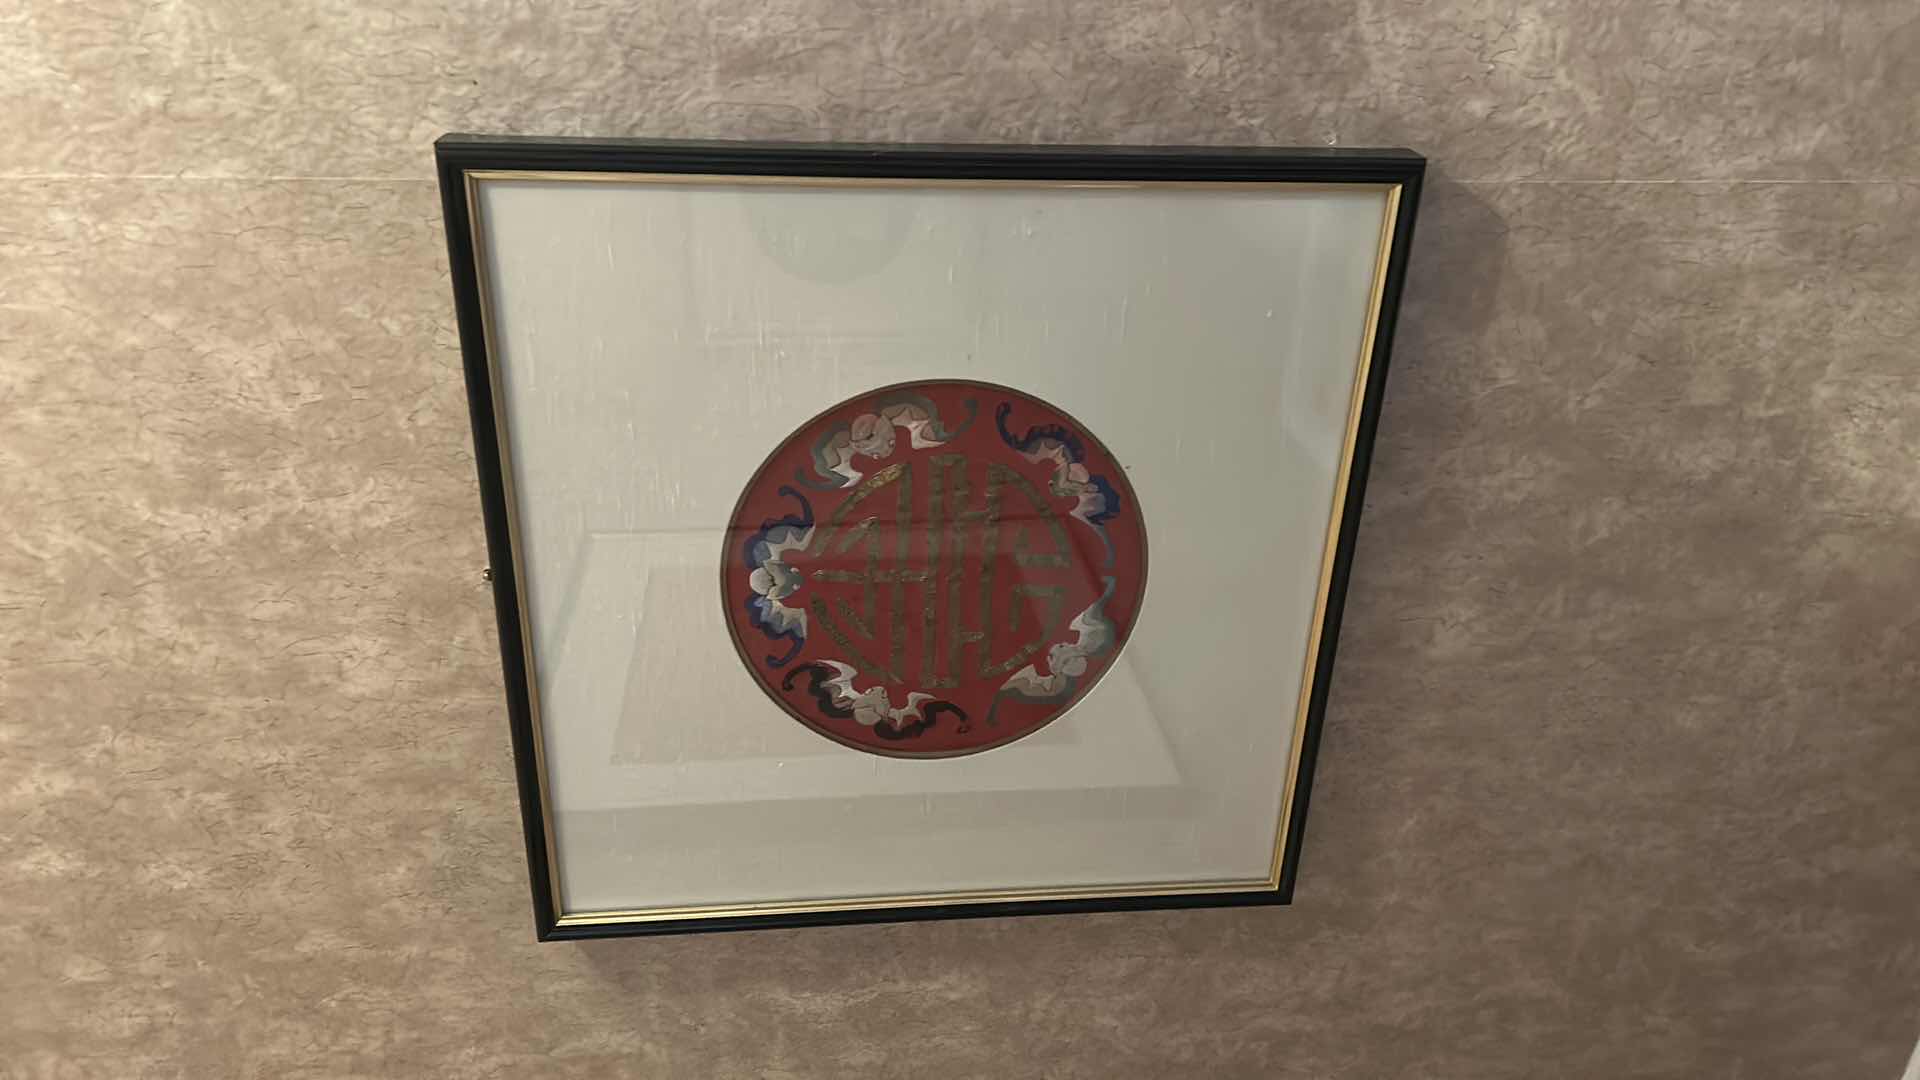 Photo 8 of ANTIQUE CHINESE TEXTILE FABRIC, SILK WITH SILK THREAD HAND EMBROIDERY ARTWORK FRAMED 18” x 18”